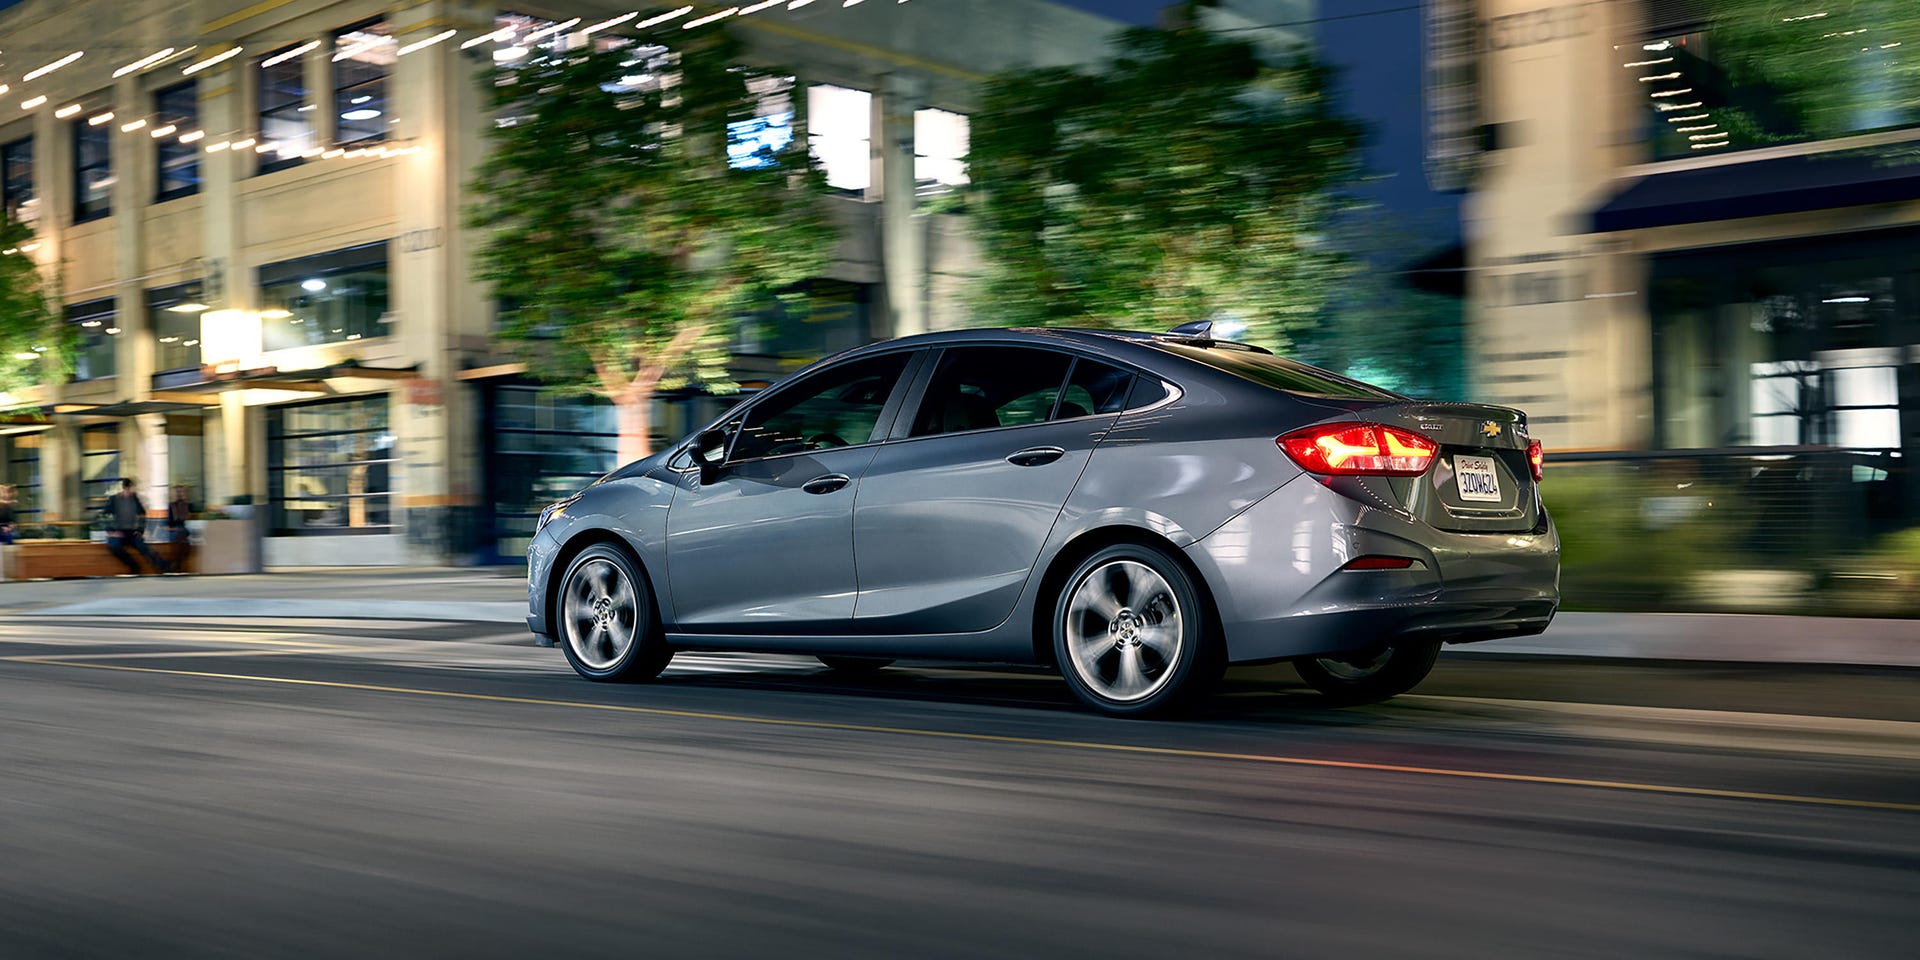 2019 Chevrolet Cruze: Model overview, pricing, tech and specs - CNET